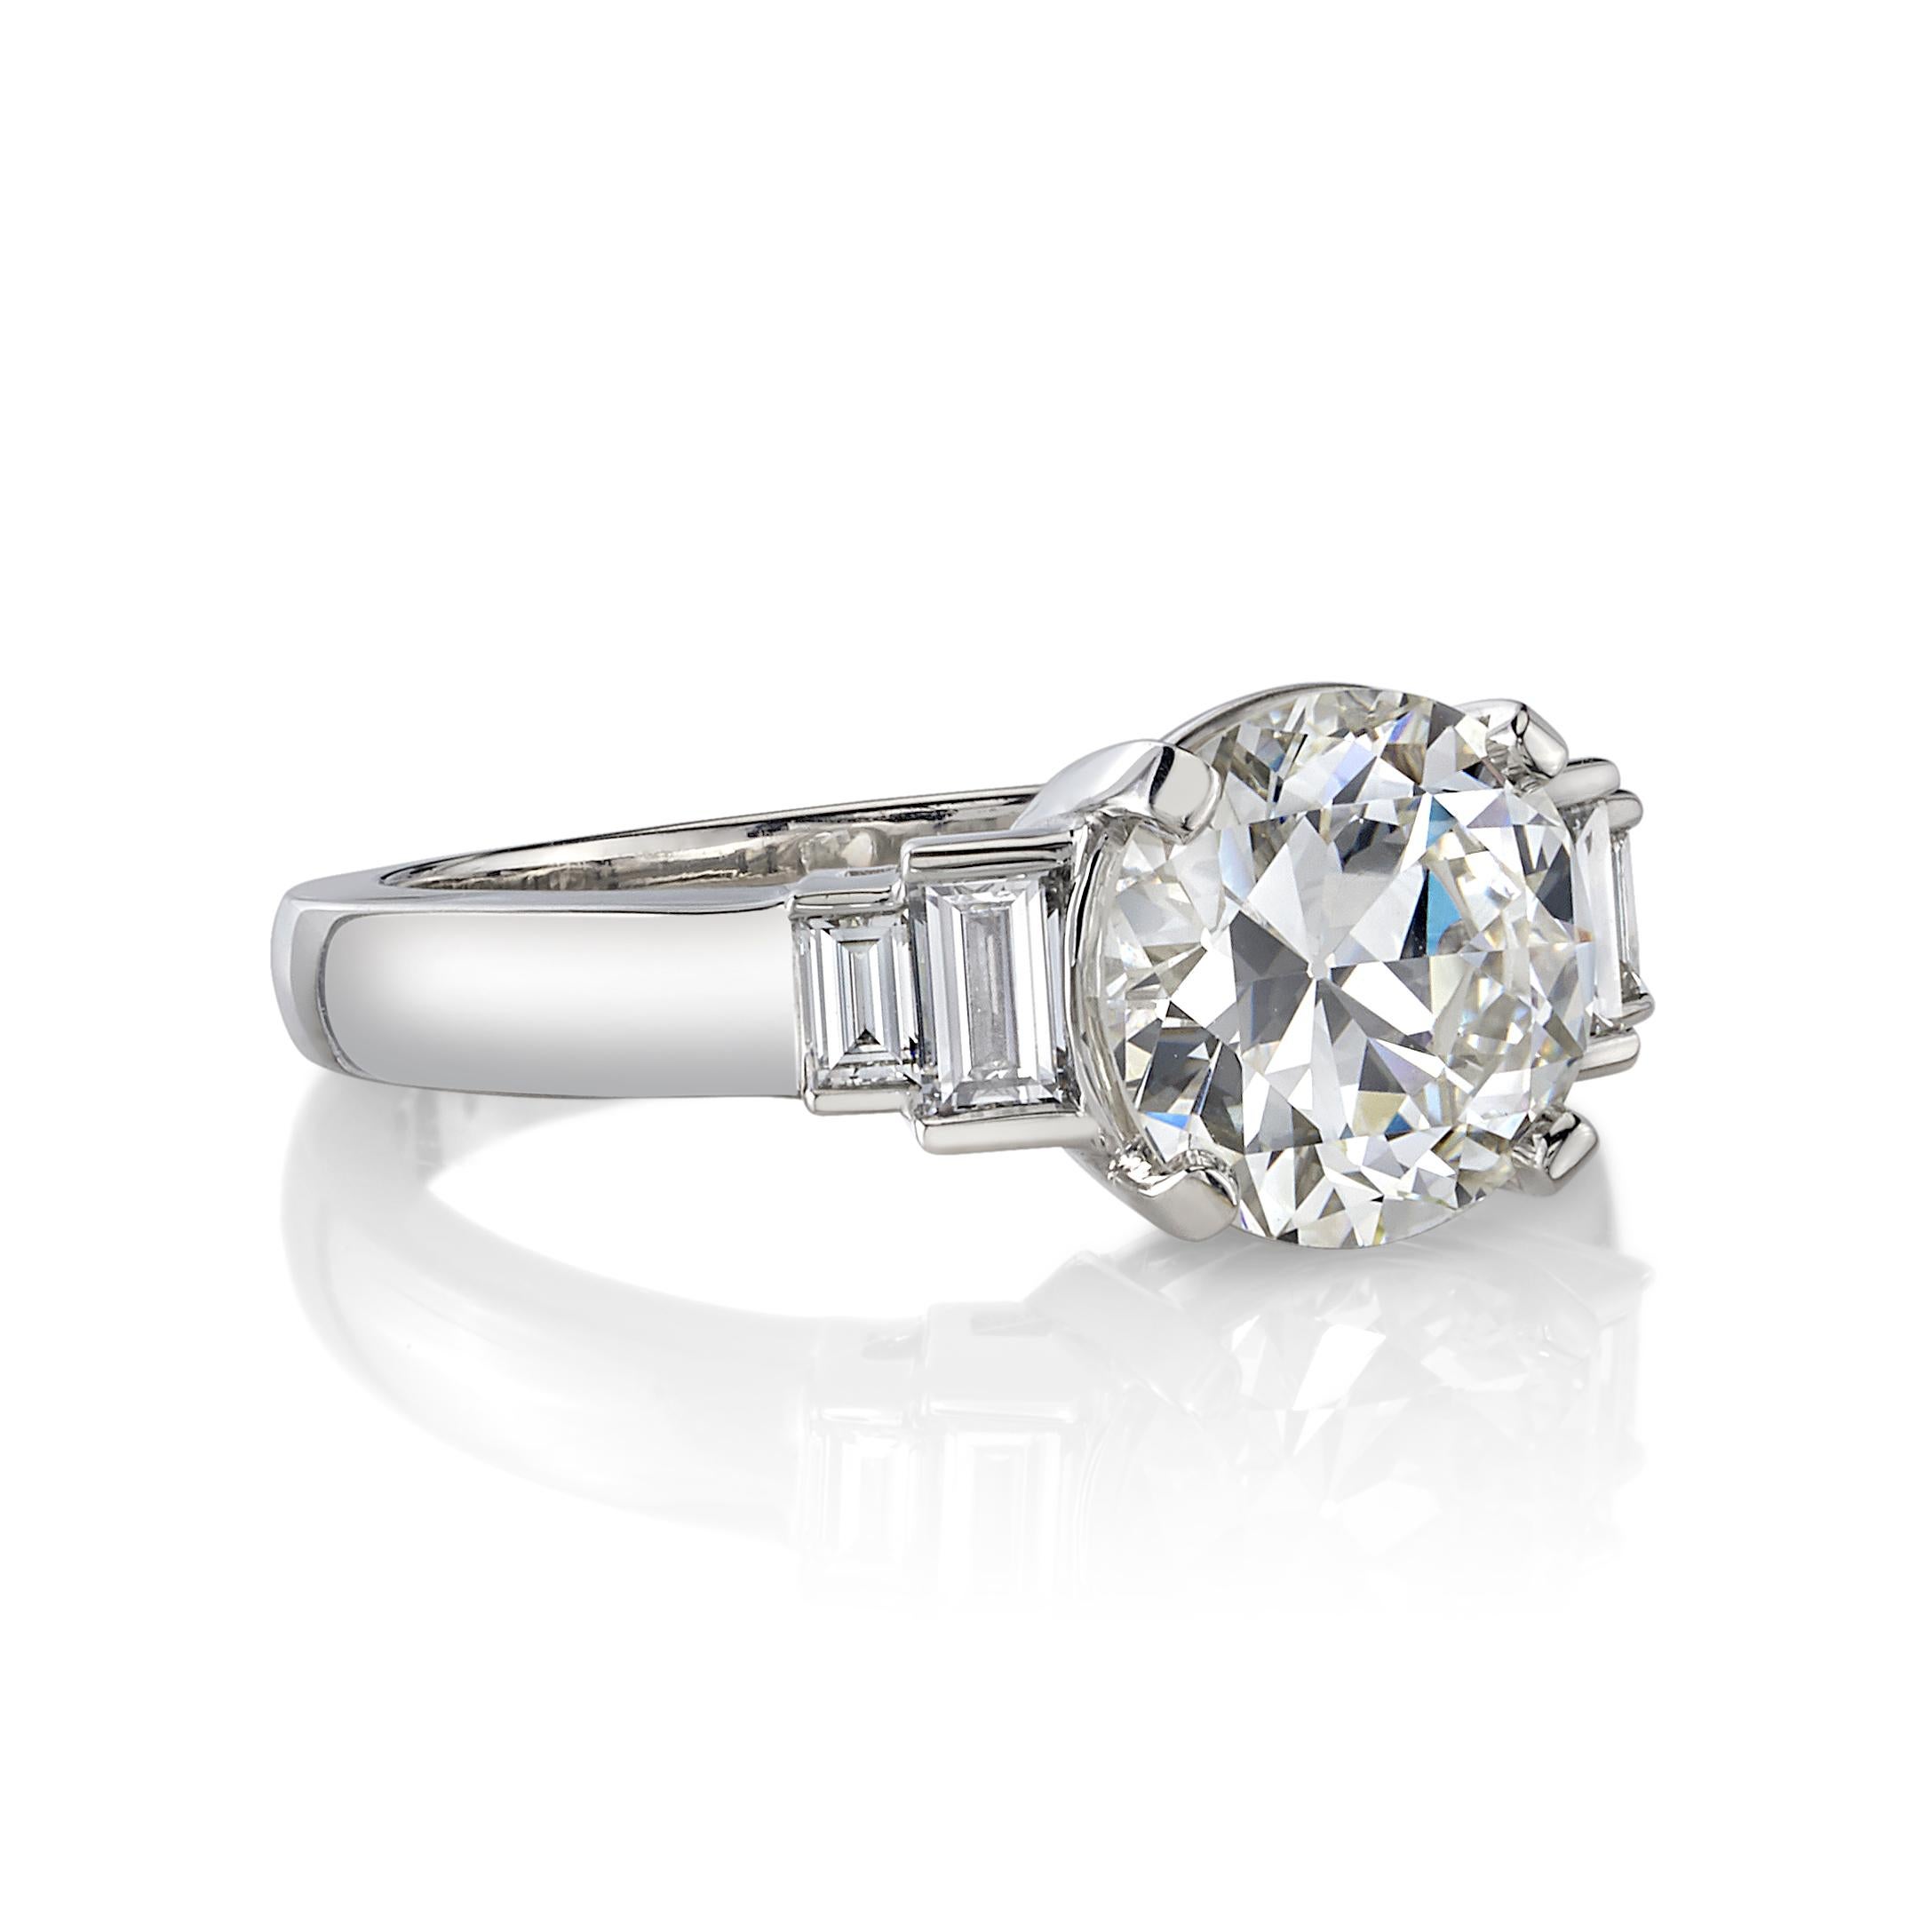 2.03ct H/VVS2 GIA certified old European cut diamond with 0.31ctw baguette cut diamond accents set in a handcrafted platinum mounting.

Ring is a size 6 and can be sized to fit.

Our jewelry is made locally in Los Angeles and most pieces are made to